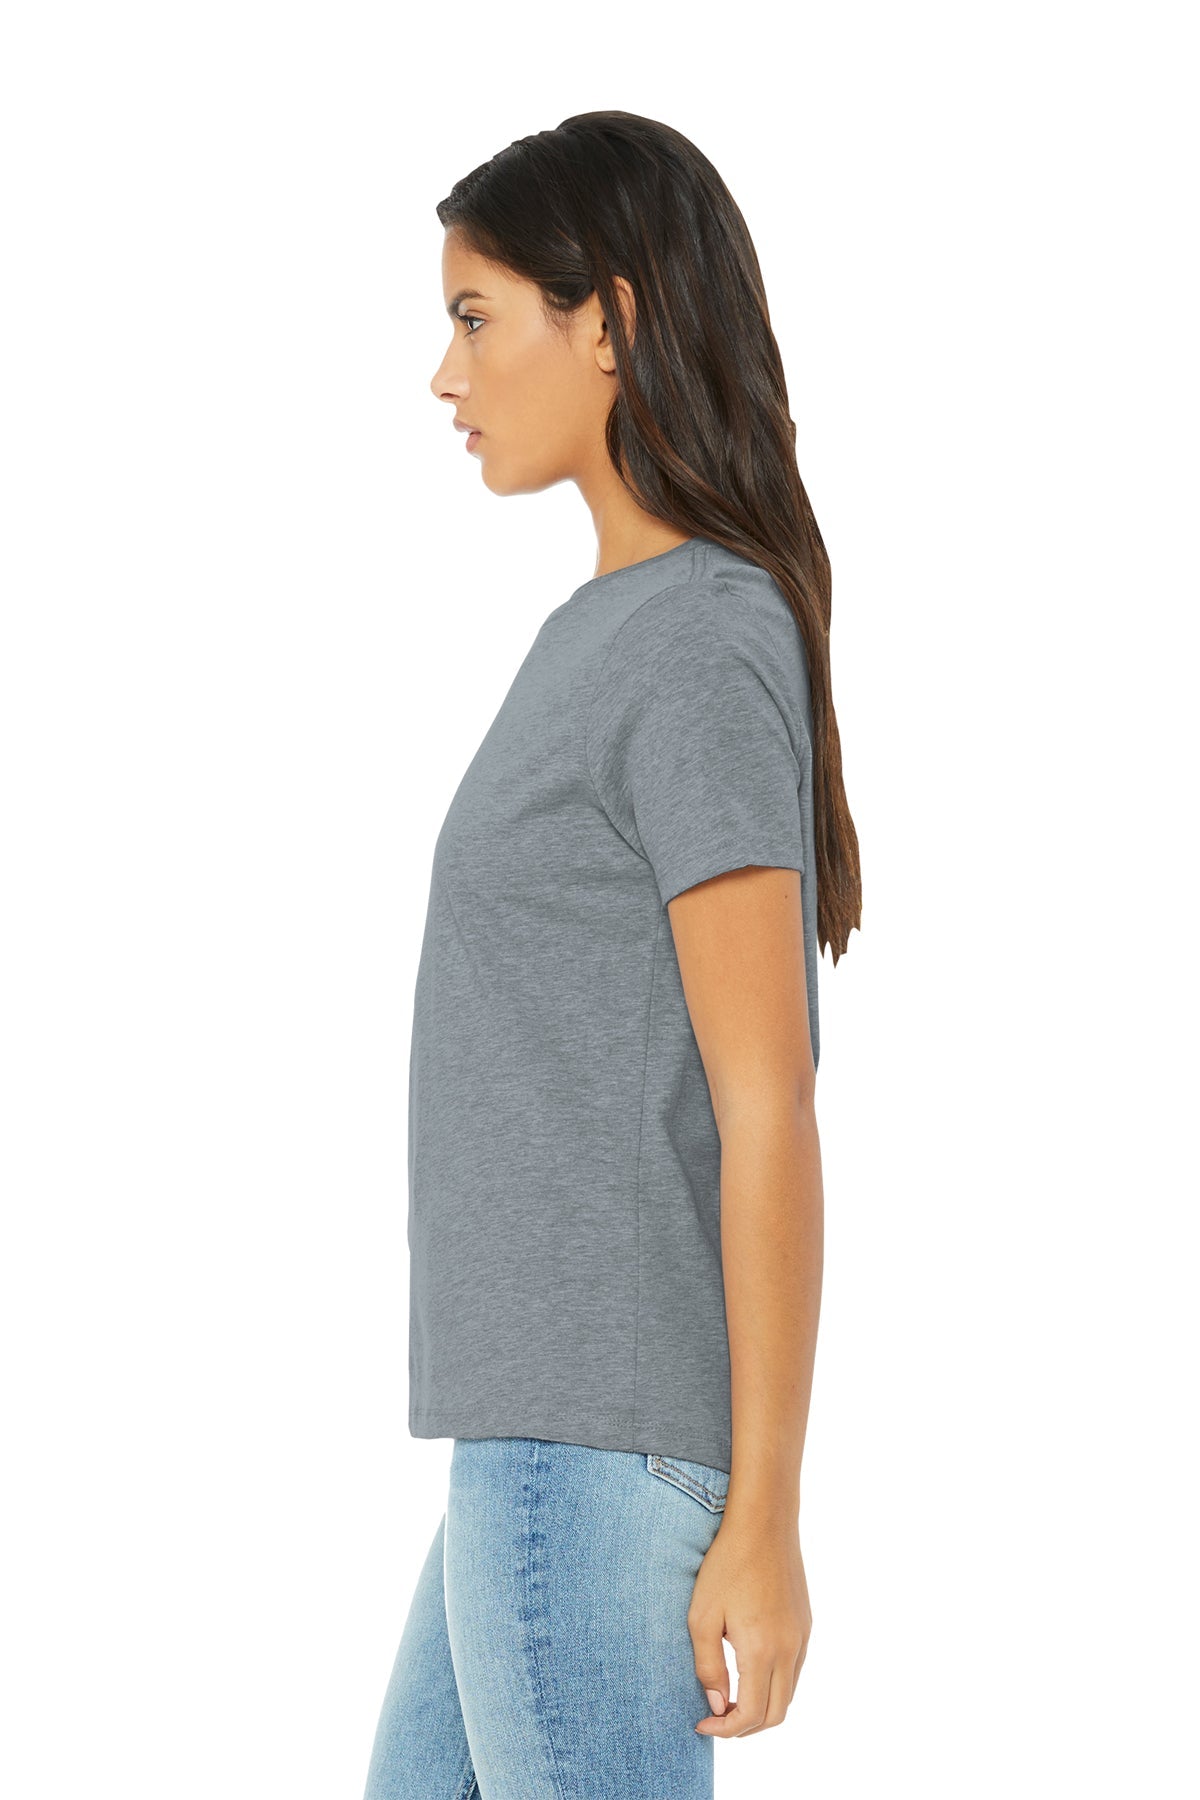 Bella Canvas Womens Relaxed T-Shirt, Athletic Heather